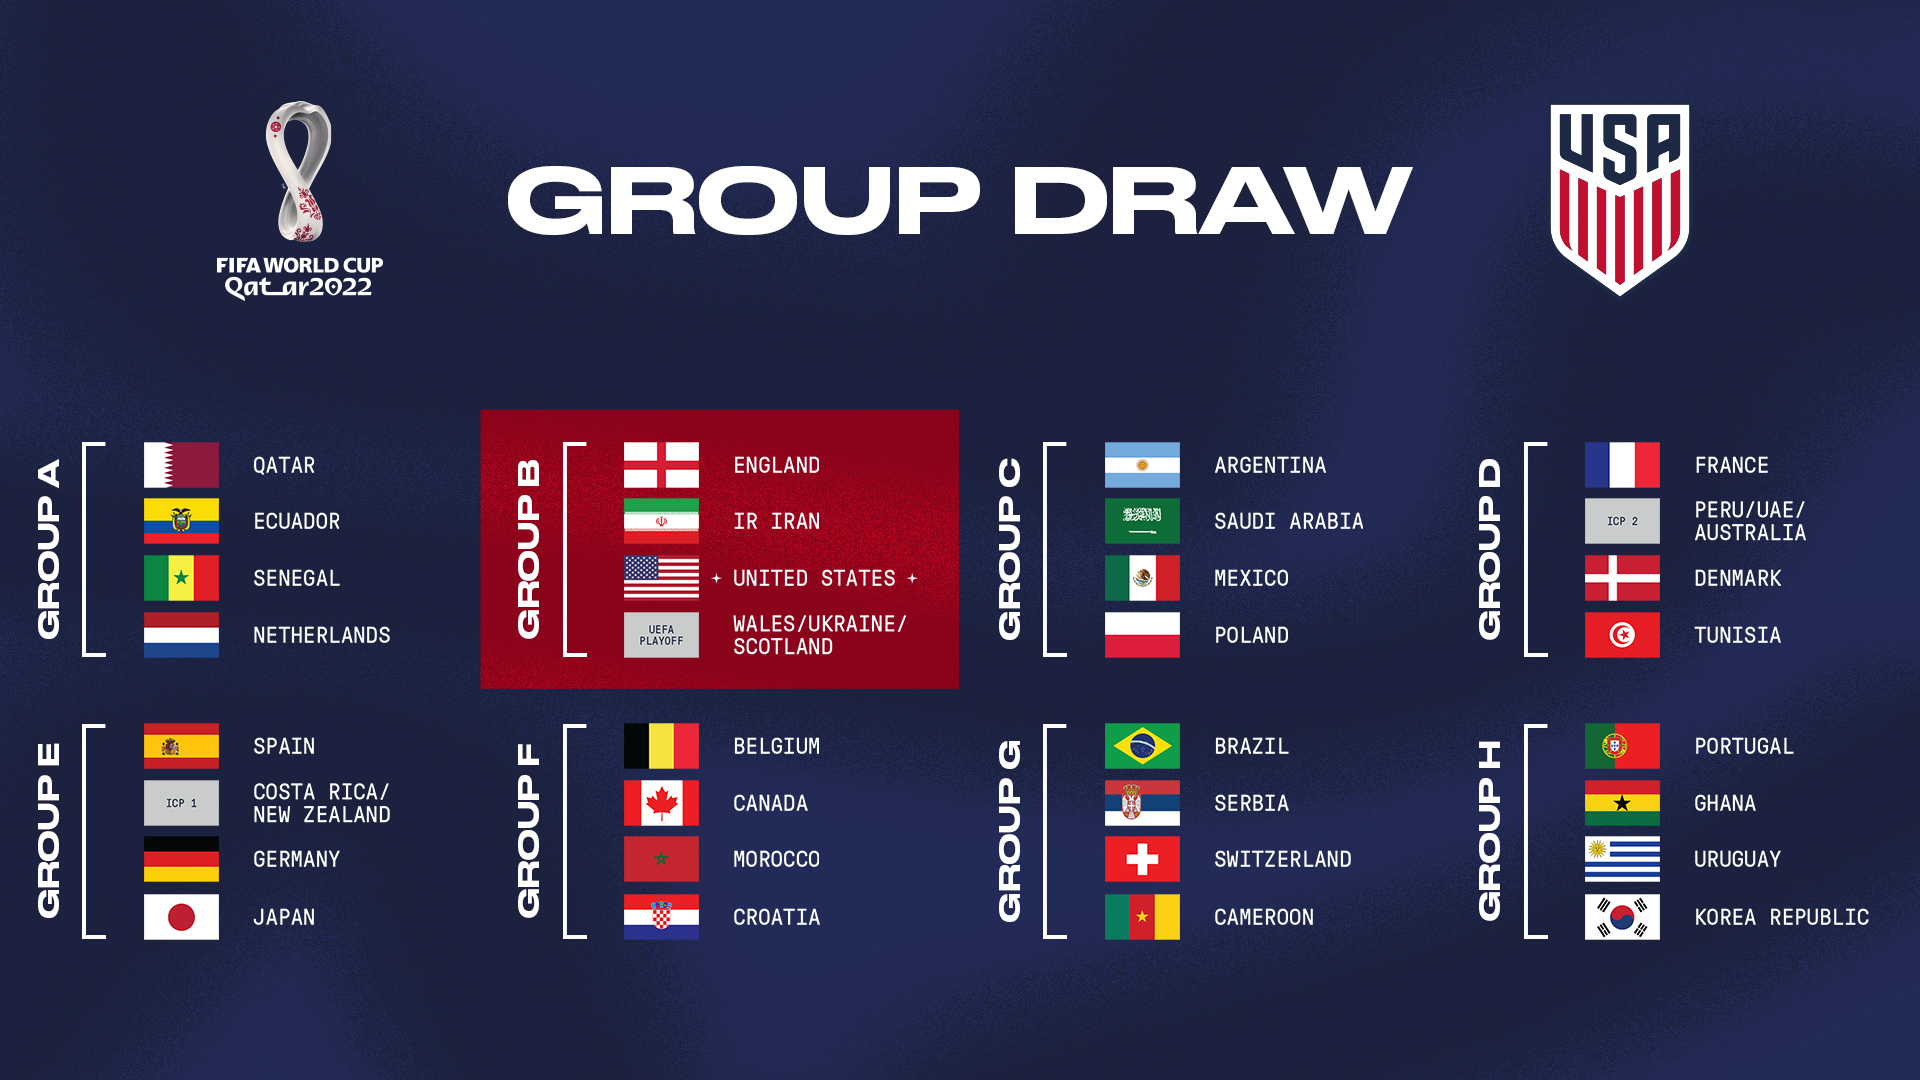 2014 FIFA World Cup Draw: So we're not using the world rankings to